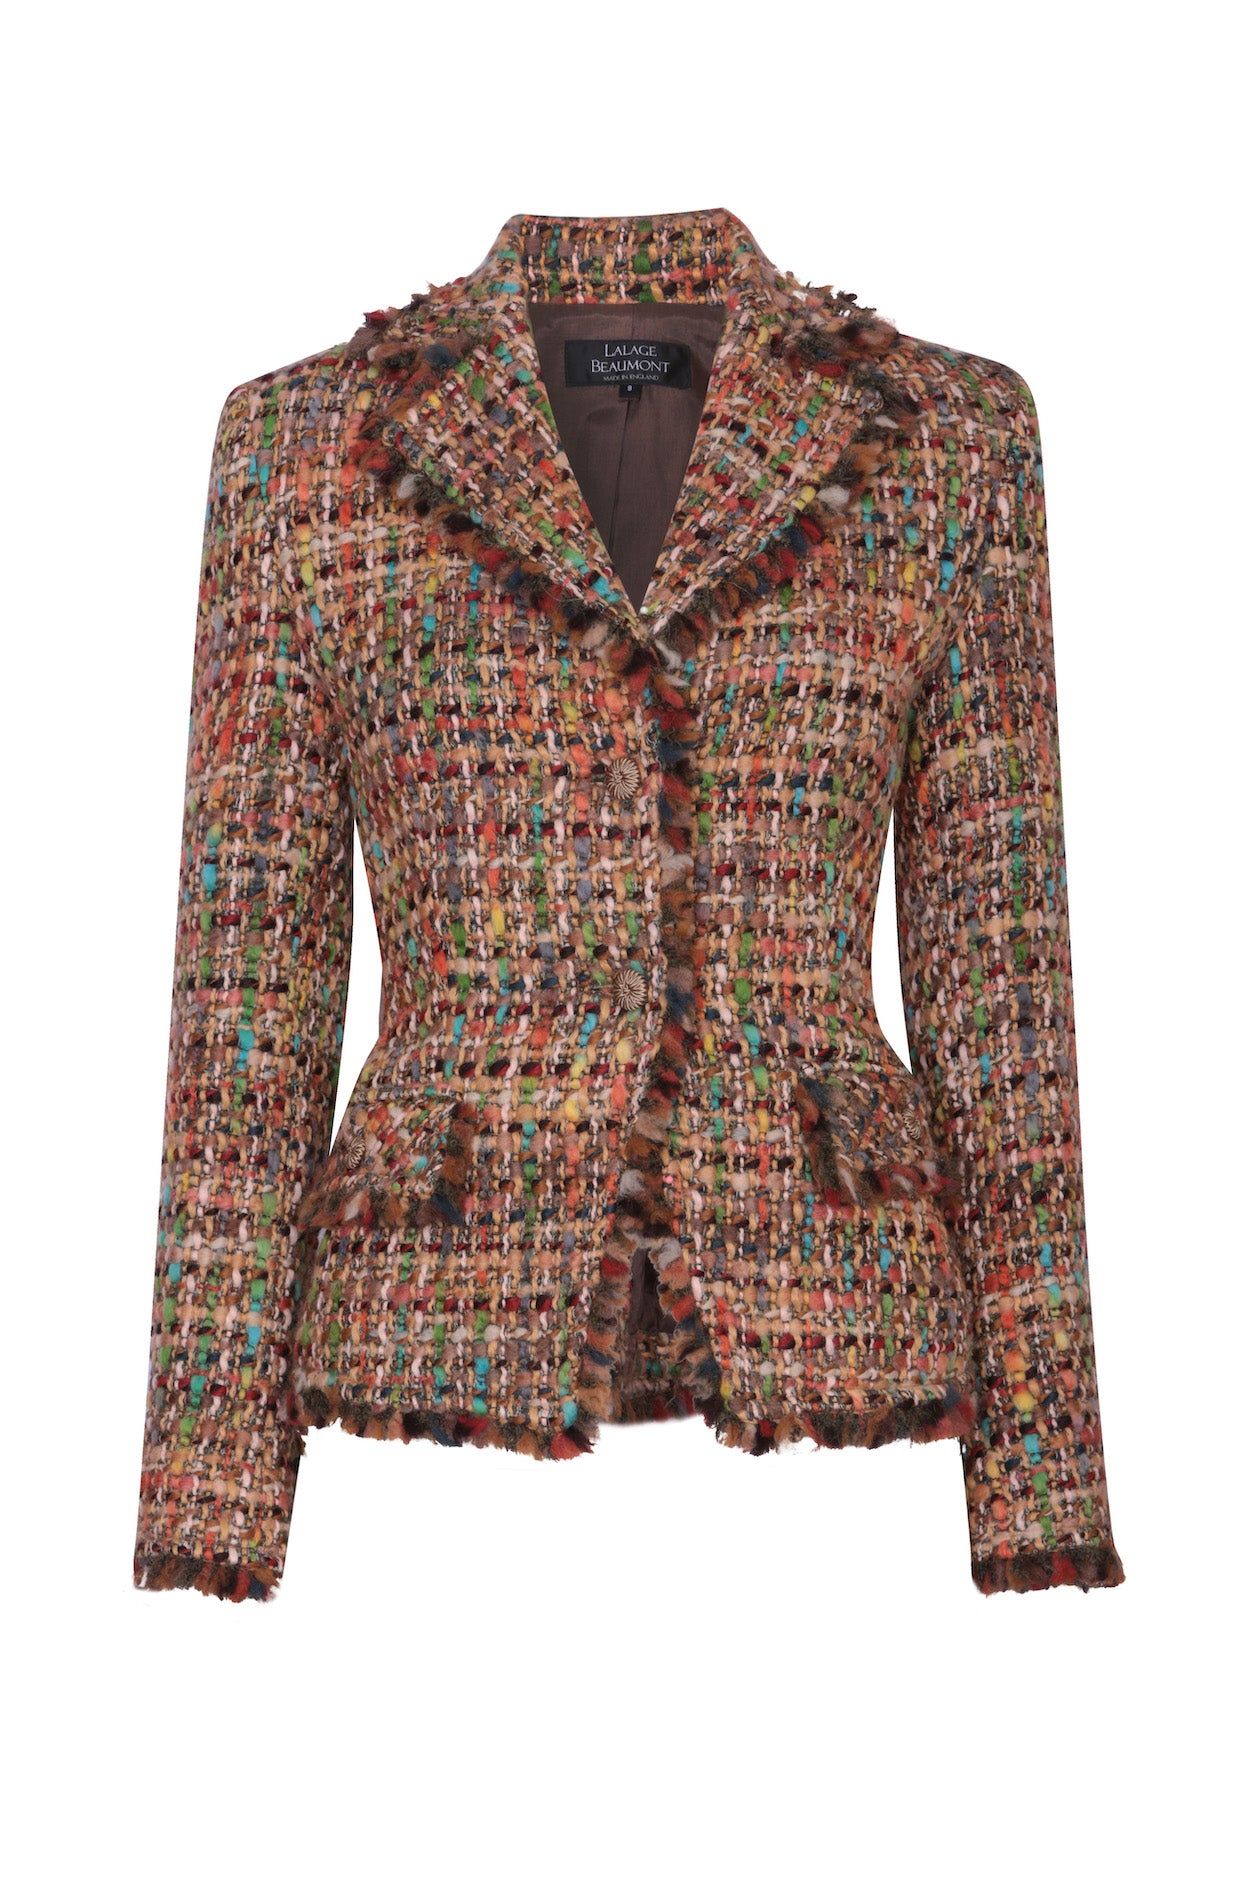 Soft Tweed Tailored Winter Jacket in Autumnal Colours - Ingrid